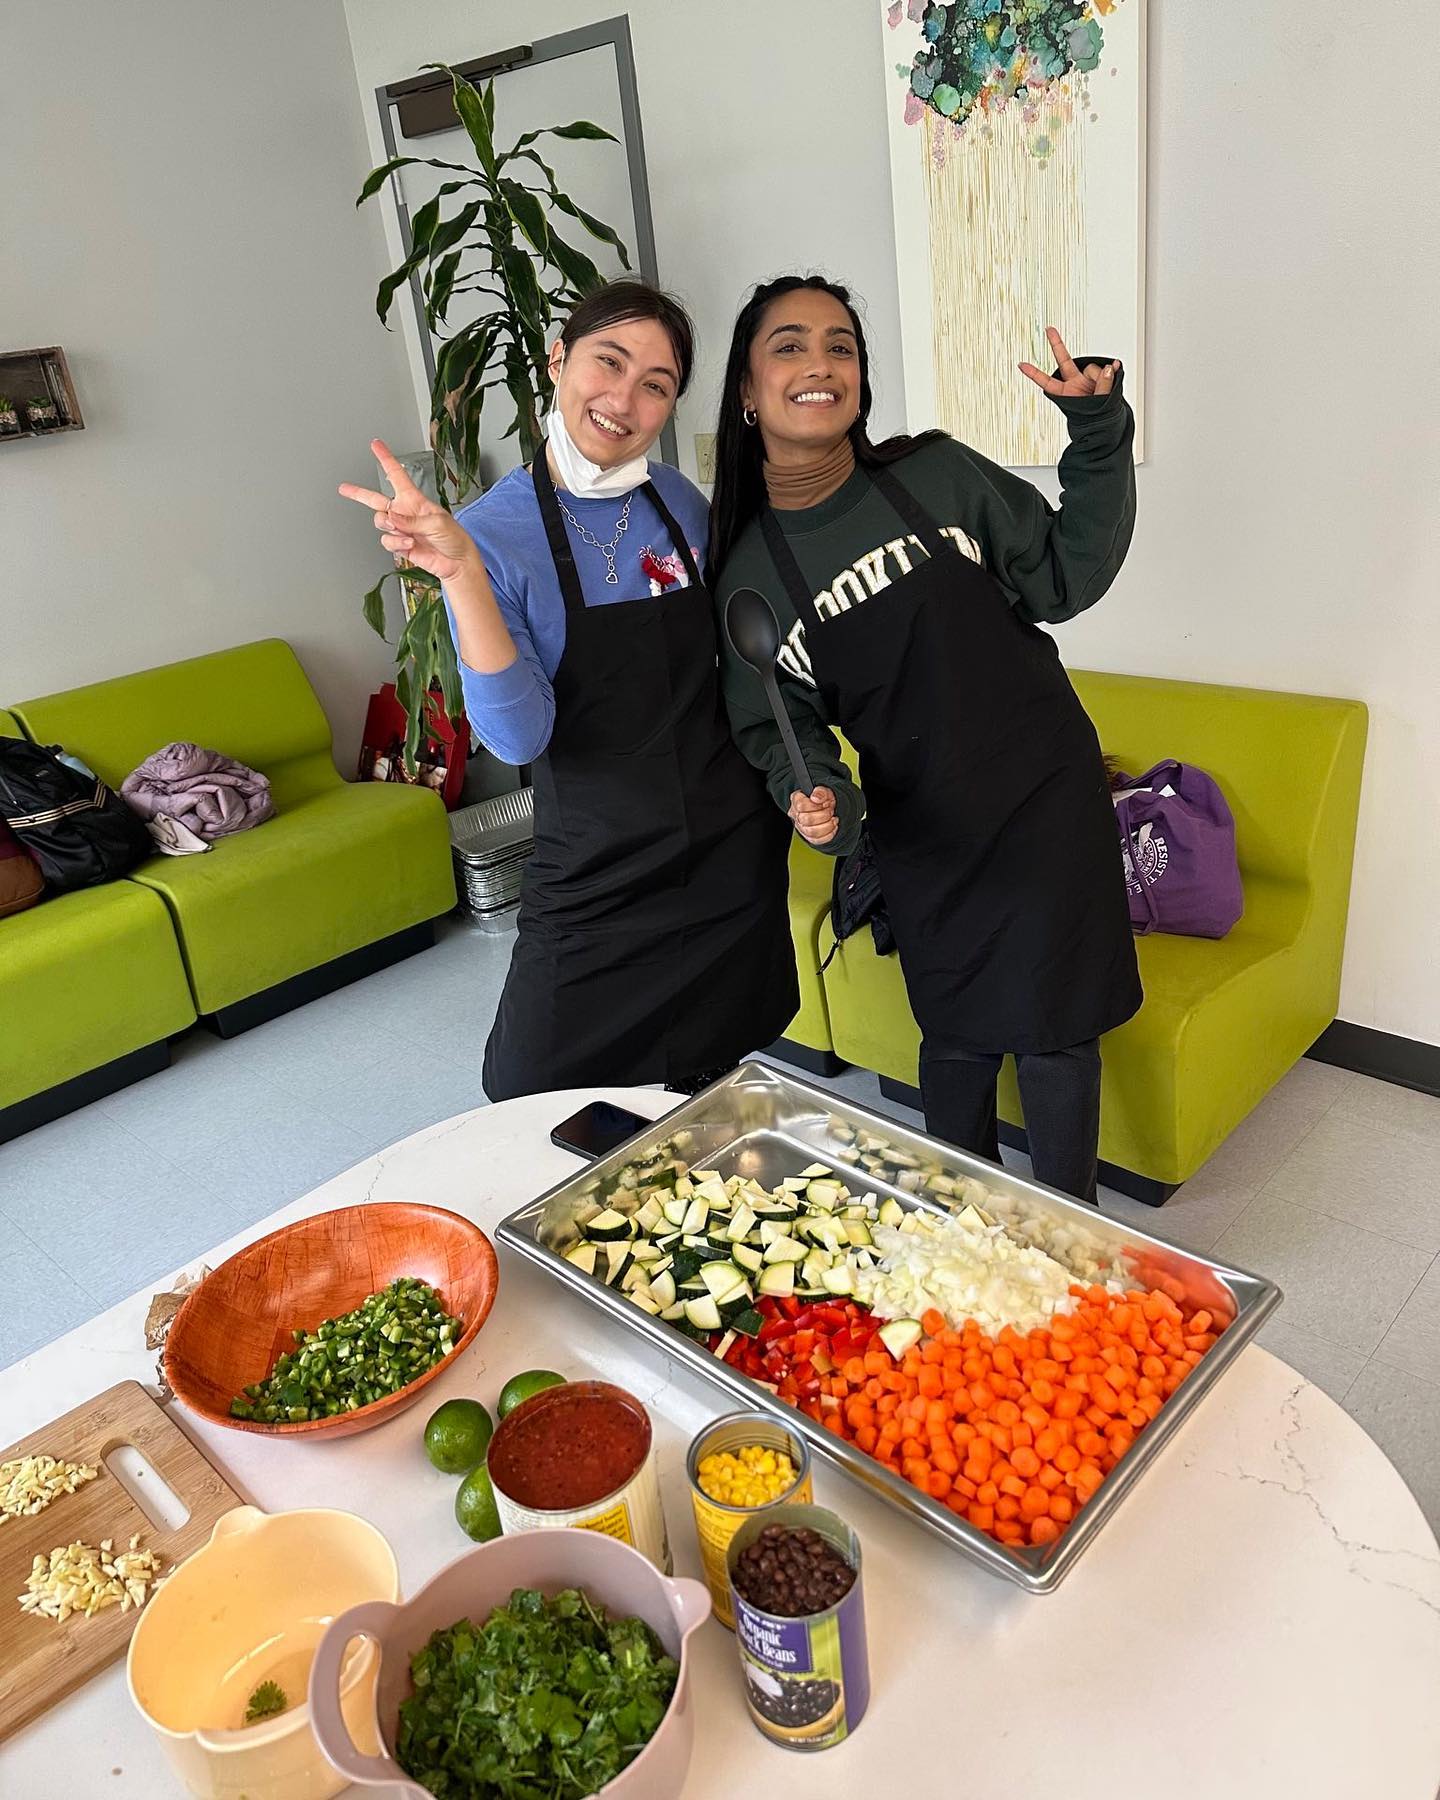 An indoor area, with modern-style sectional seating, an abstract painting, and a potted plant in the background. Two people wearing aprons make 'peace' signs and smile at the camera. On the table in front of them are bowls and pans full of chopped vegetables.